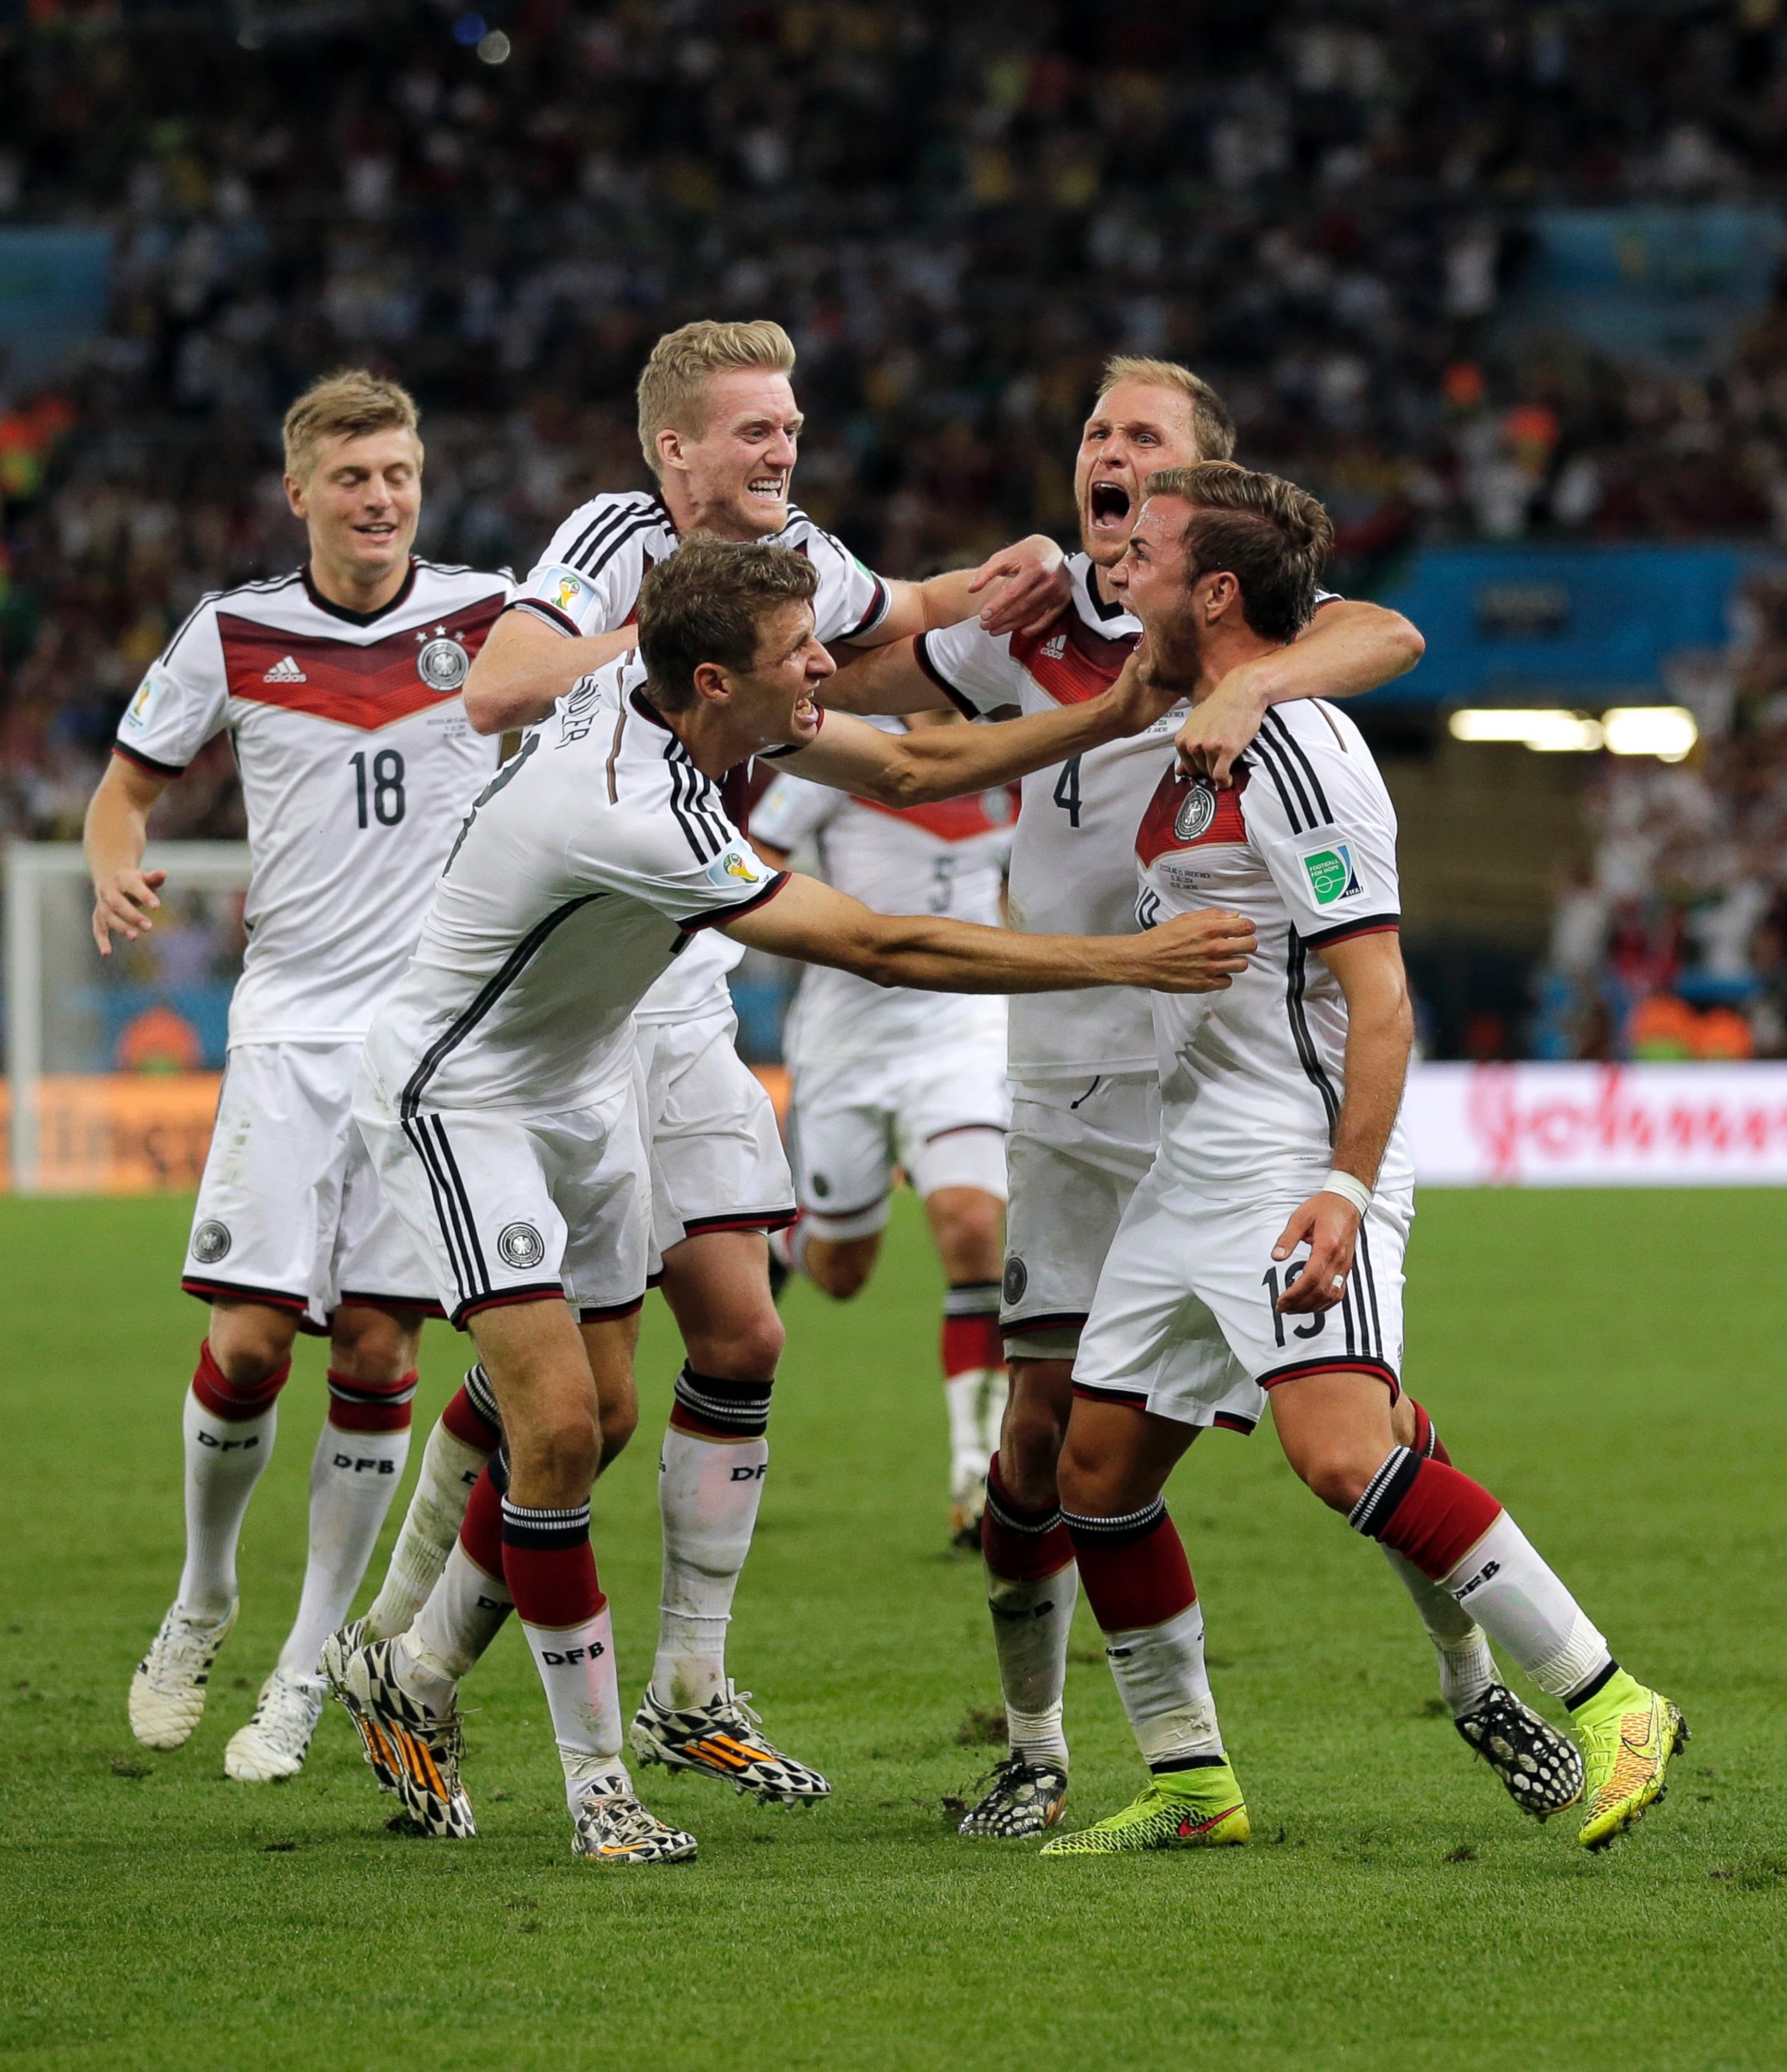 Mario Goetze Gives Germany Its 4th World Cup Title in 1-0 Win Over Argentina